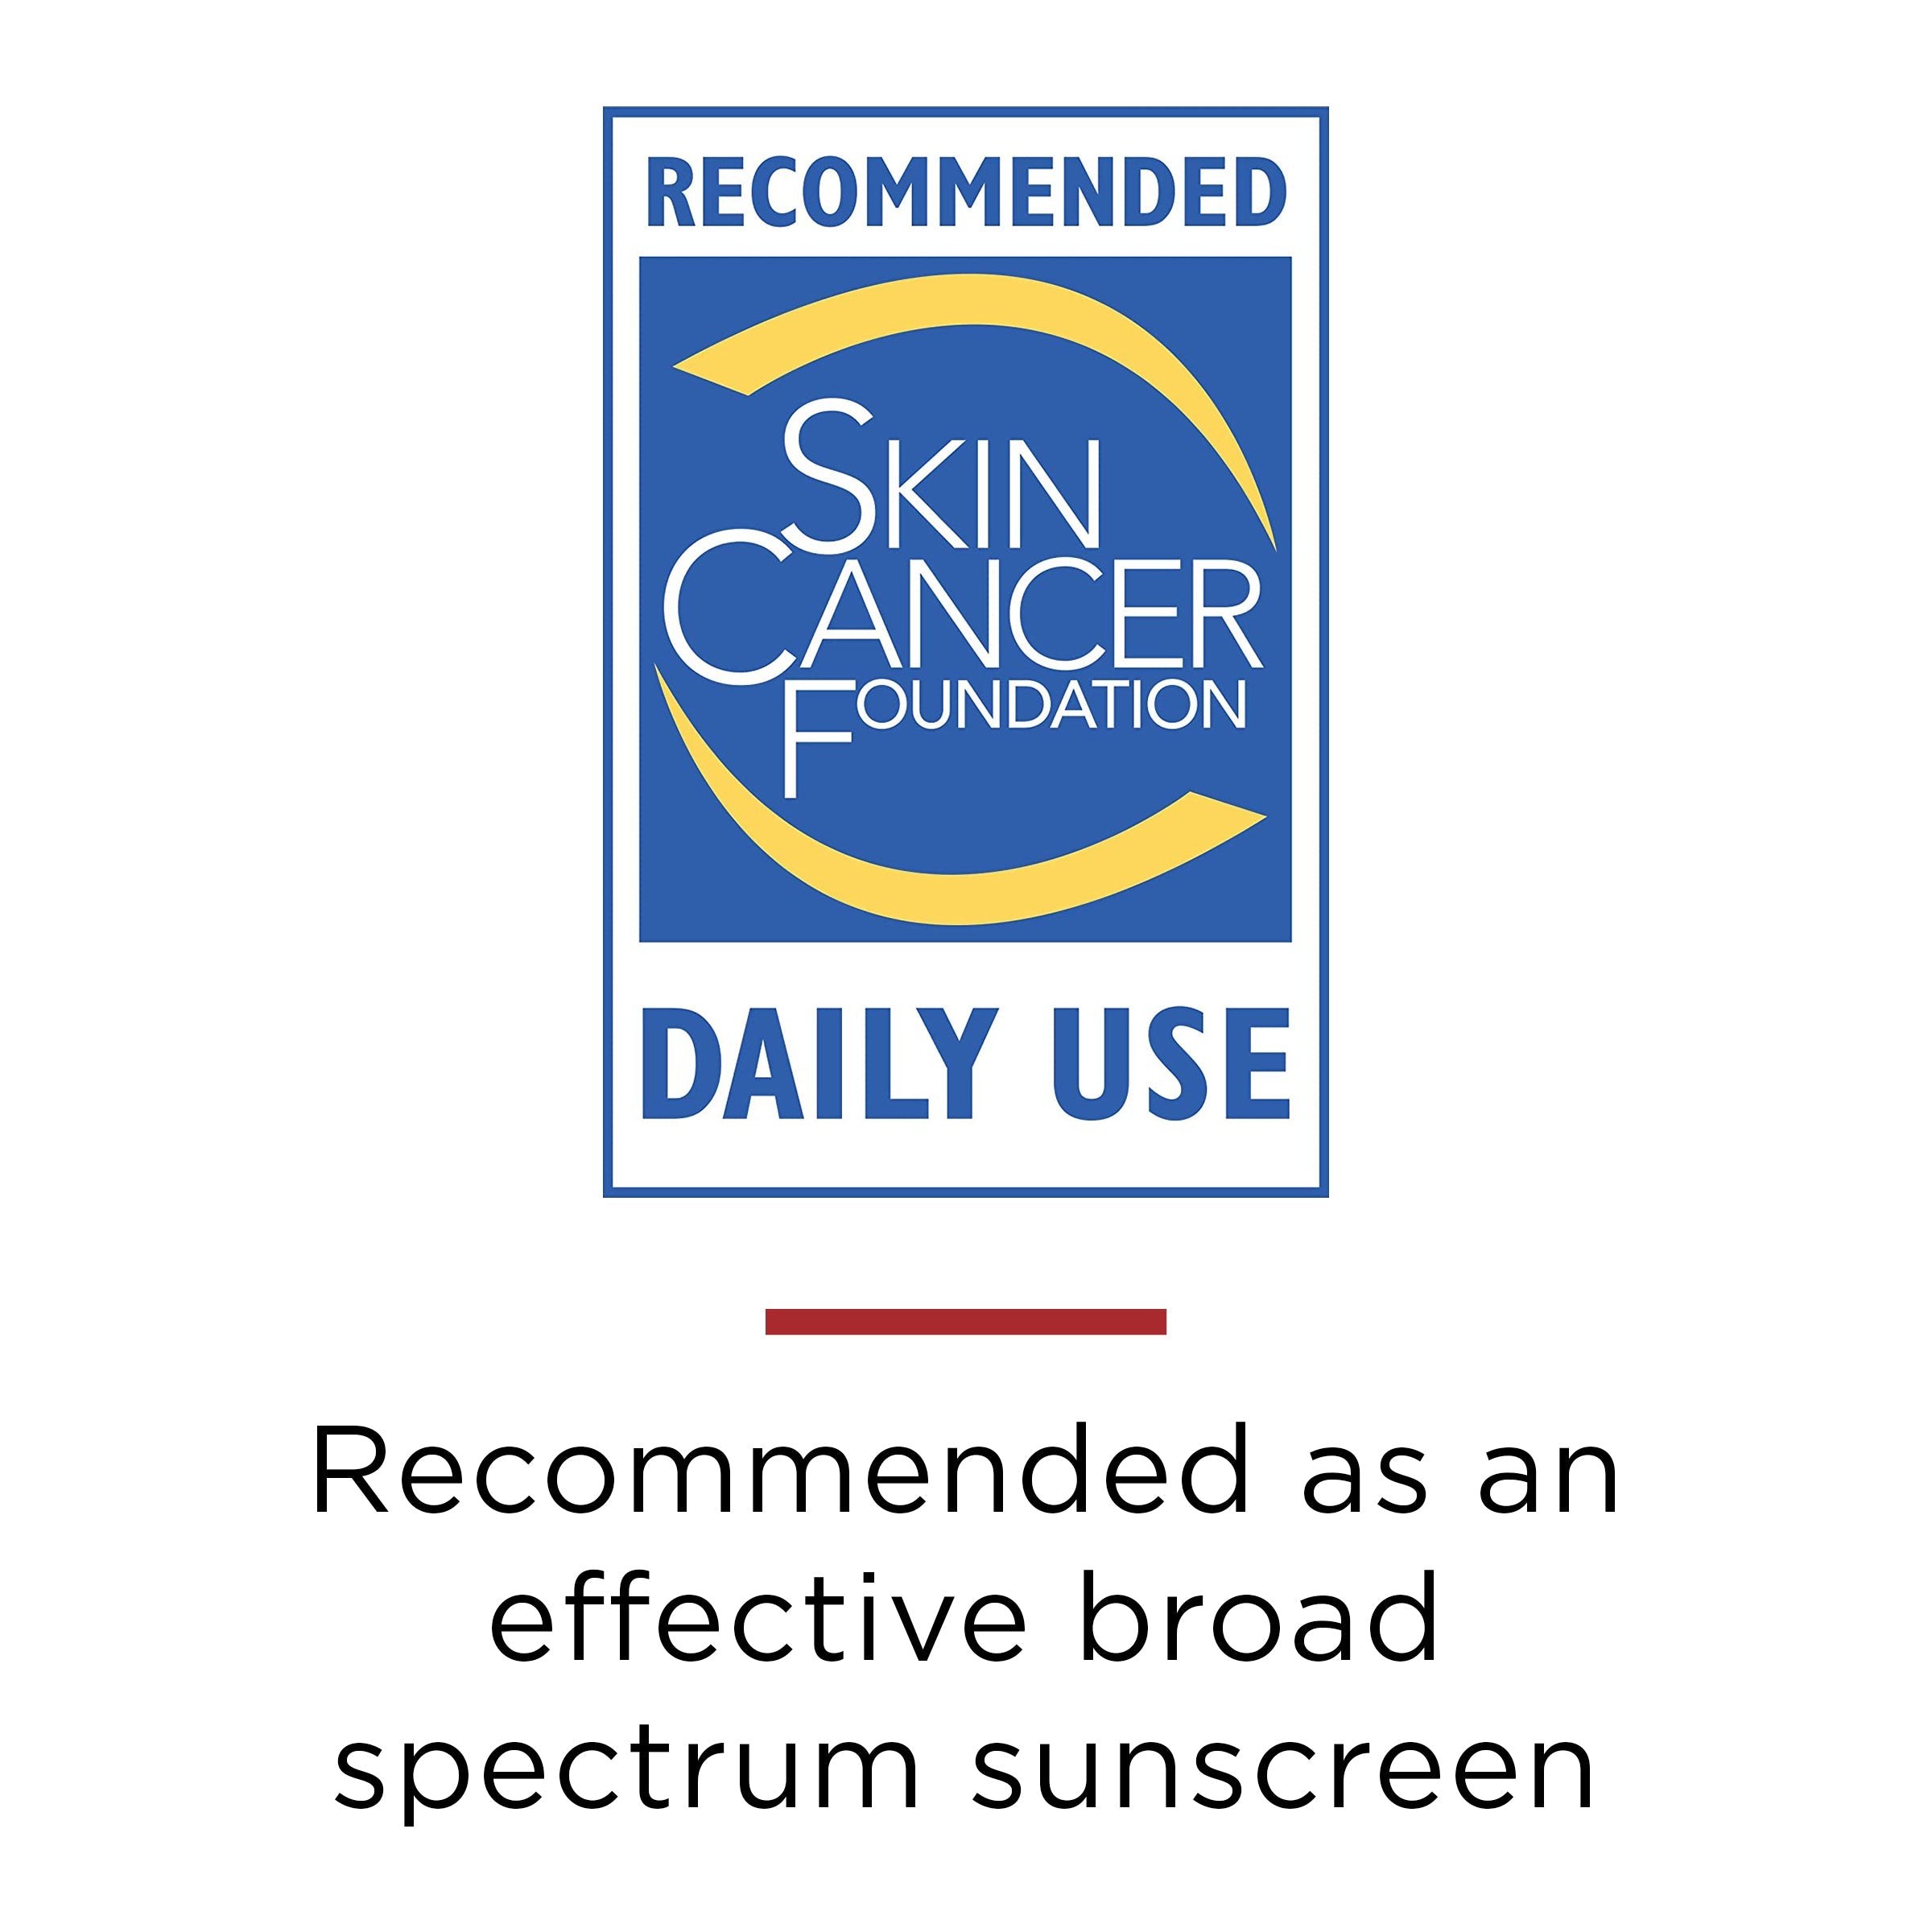 Skin Cancer Foundation - Recommended for Daily Use